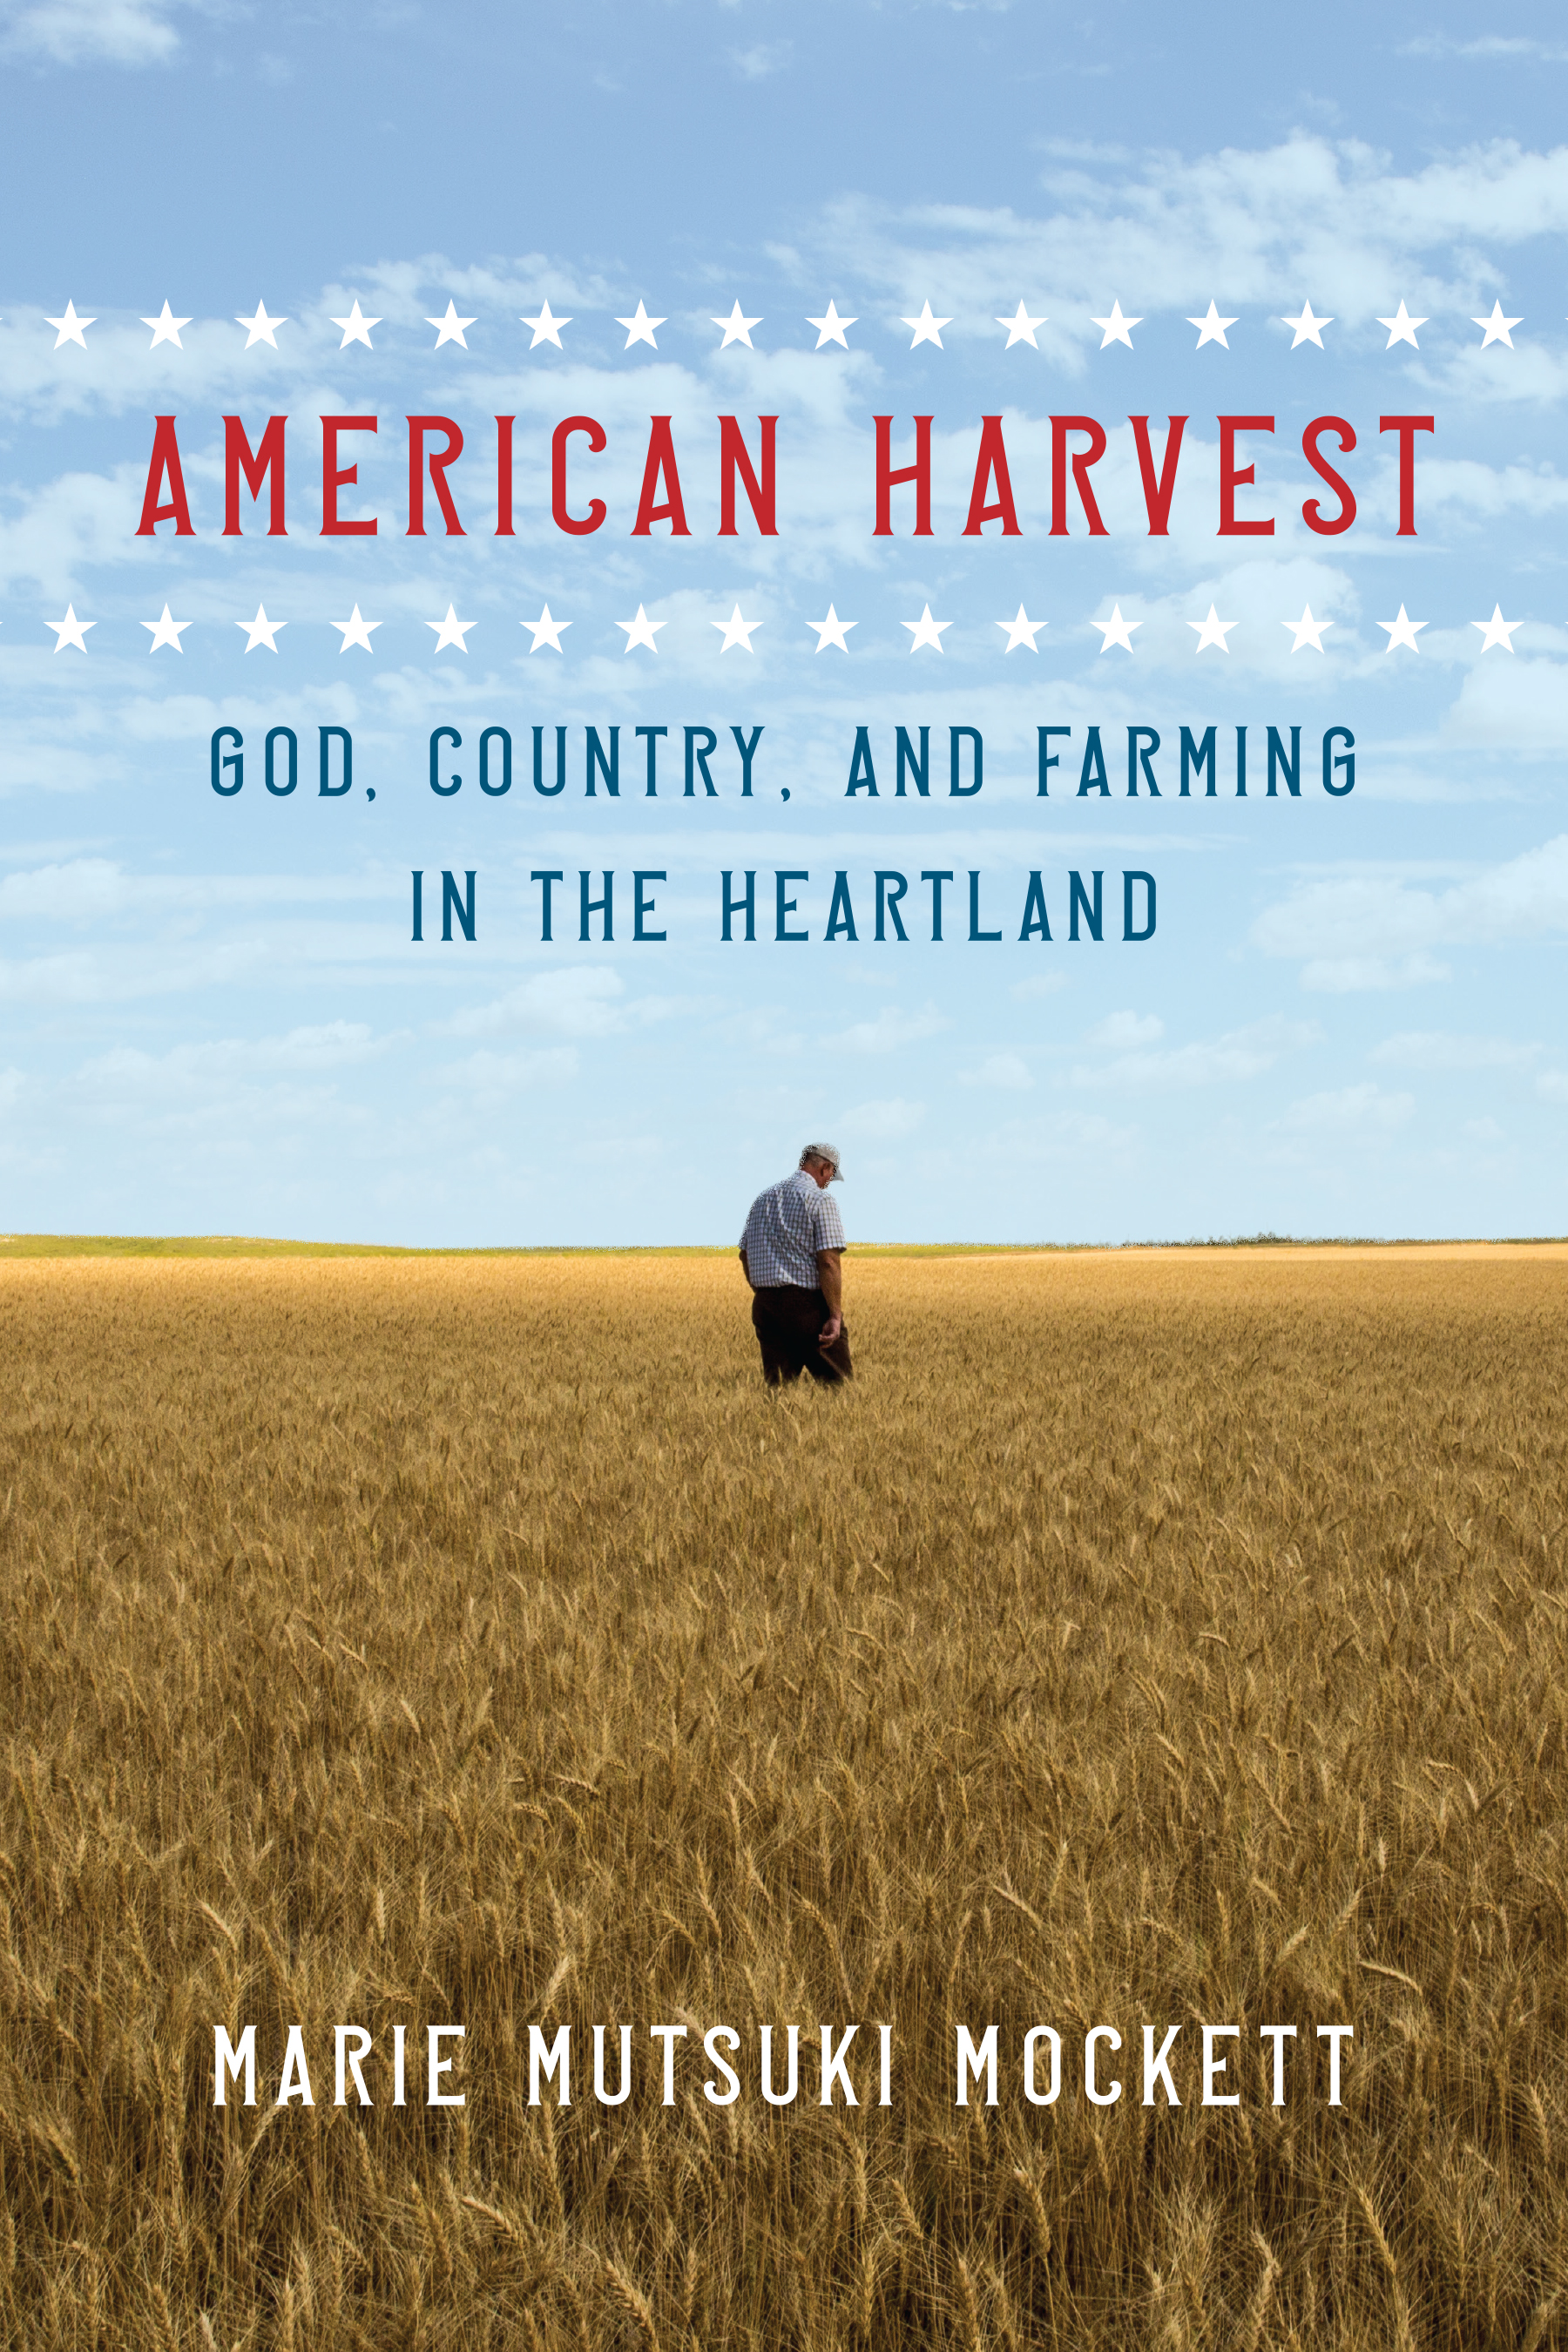 The cover of American Harvest: God, Country, and Farming in the Heartland